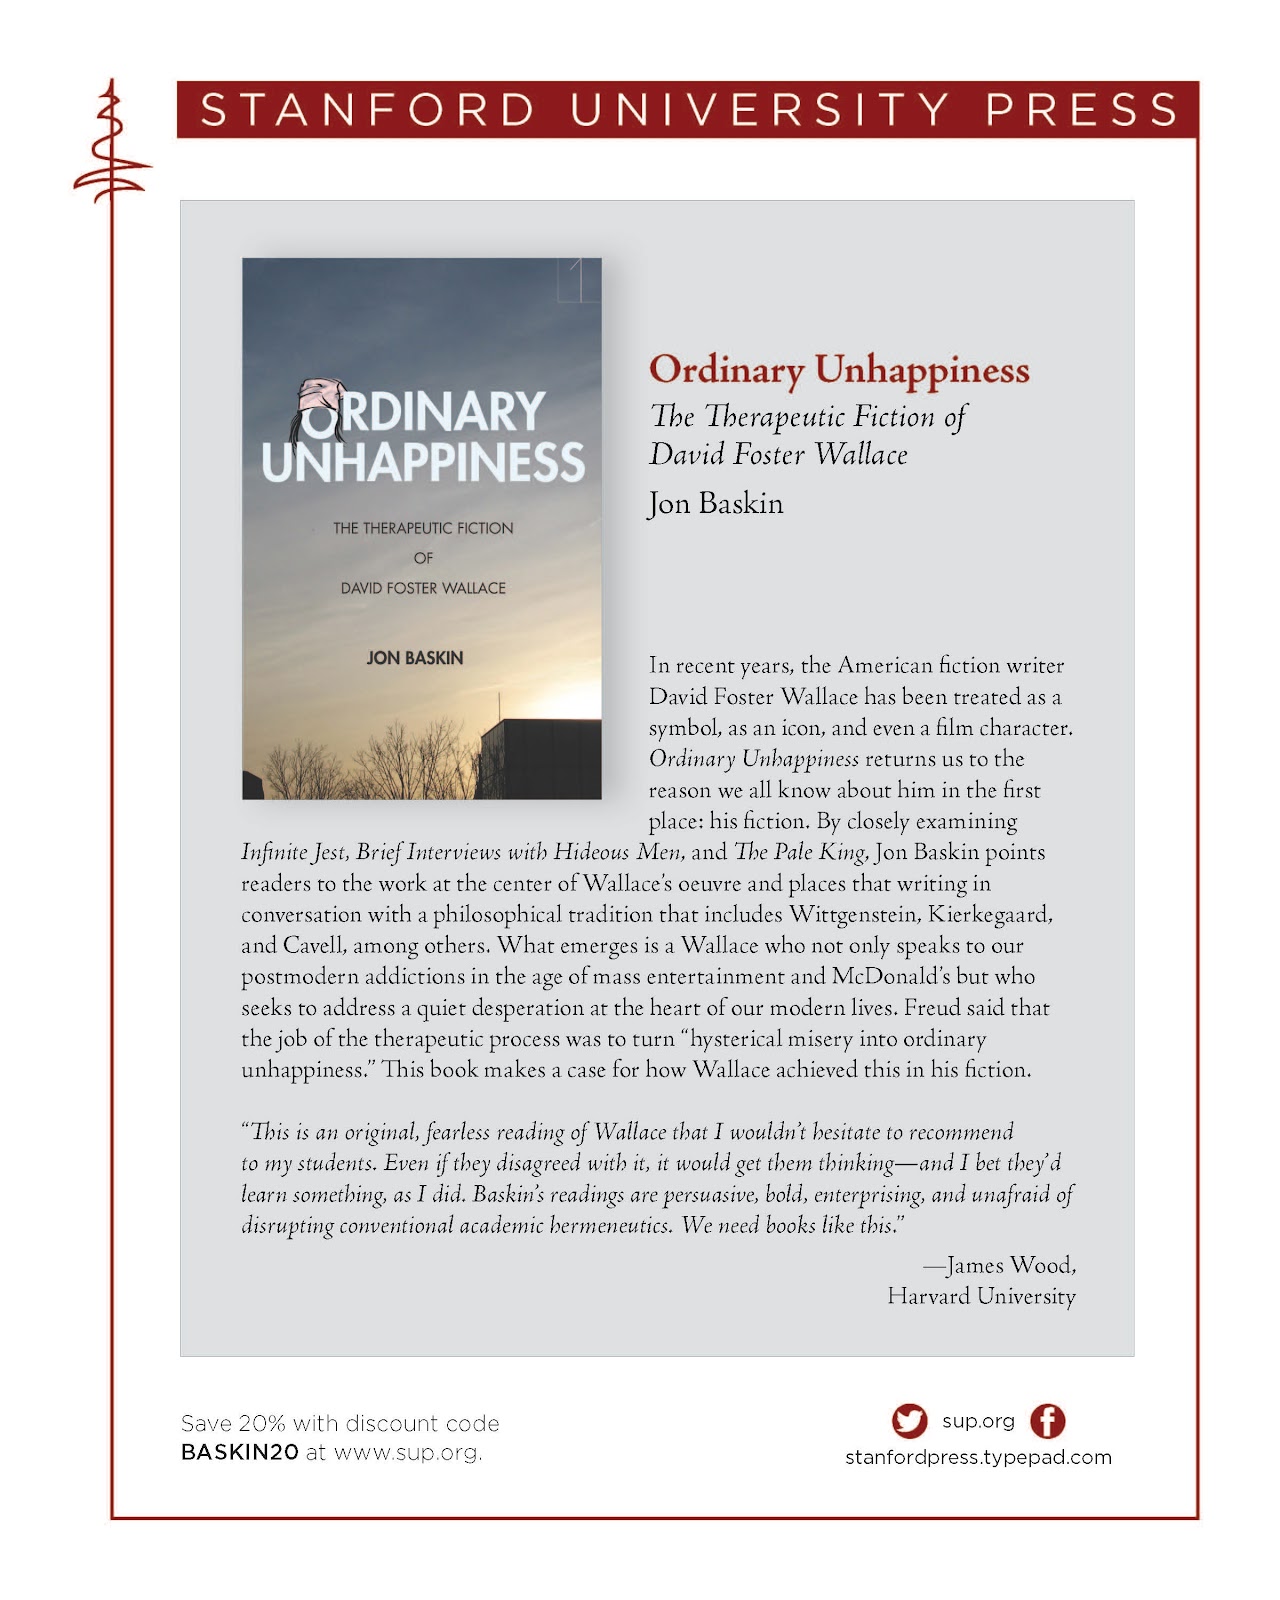 Link to Page on Stanford University Press: https://www.sup.org/books/title/?id=29316

In recent years, the American fiction writer David Foster Wallace has been treated as a symbol, as an icon, and even a film character. Ordinary Unhappiness returns us to the reason we all know about him in the first place: his fiction. By closely examining Infinite Jest, Brief Interviews with Hideous Men, and The Pale King, Jon Baskin points readers to the work at the center of Wallace's oeuvre and places that writing in conversation with a philosophical tradition that includes Wittgenstein, Kierkegaard, and Cavell, among others. What emerges is a Wallace who not only speaks to our postmodern addictions in the age of mass entertainment and McDonald's but who seeks to address a quiet desperation at the heart of our modern lives. Freud said that the job of the therapeutic process was to turn "hysterical misery into ordinary unhappiness." This book makes a case for how Wallace achieved this in his fiction.

About the author

Jon Baskin is the Associate Director of the Creative Publishing and Critical Journalism program at the New School for Social Research and a founding editor of The Point.